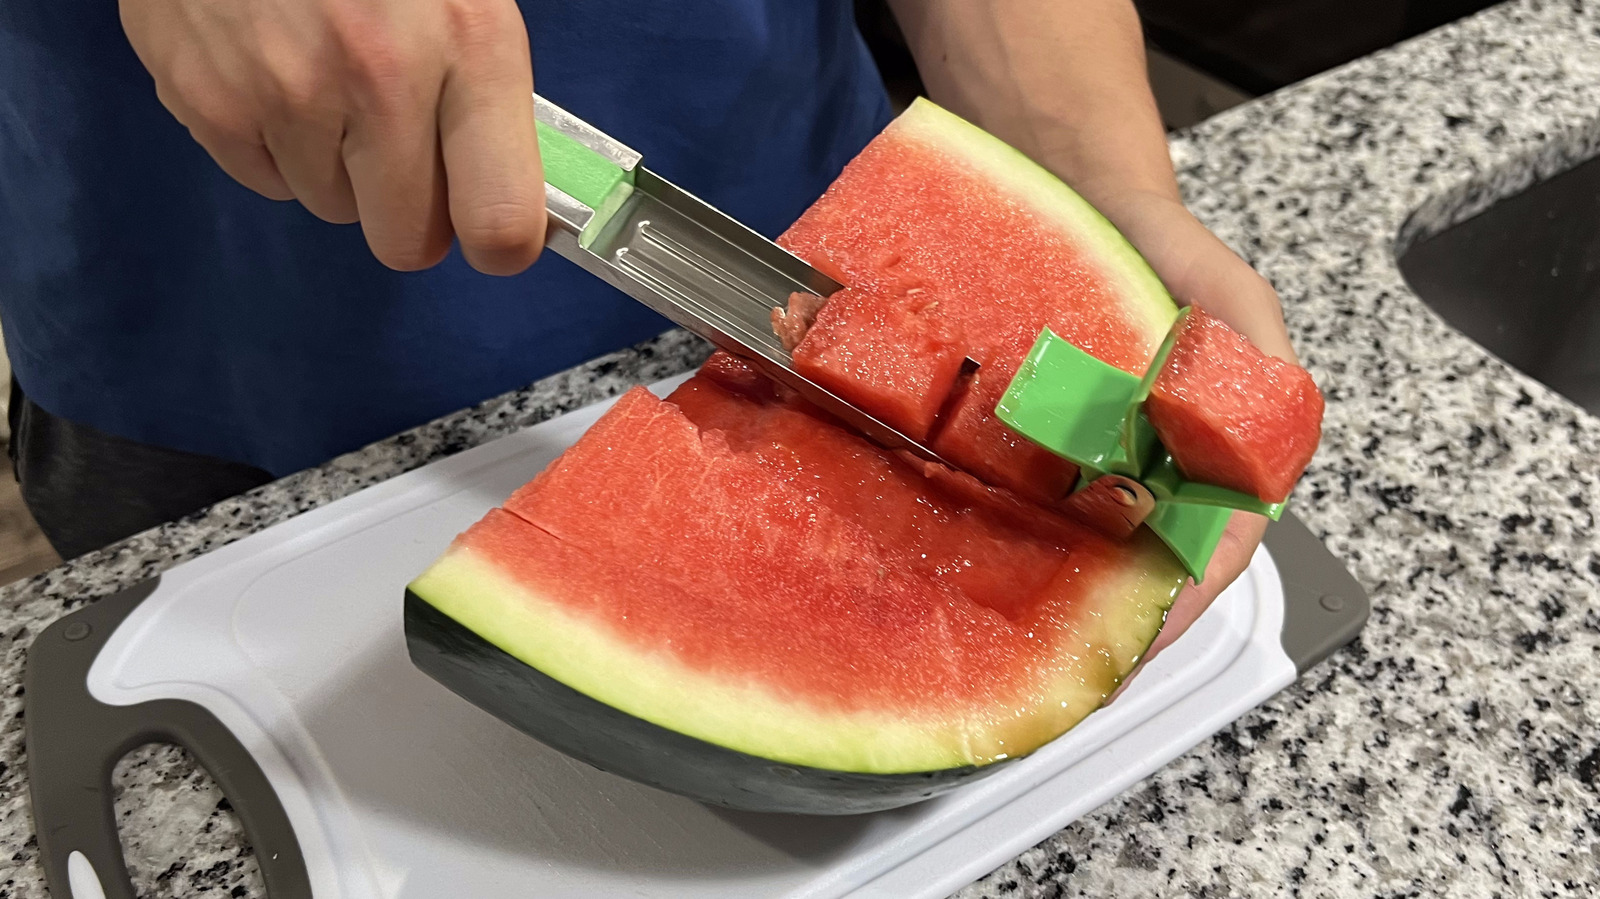 We Tried This Cheap Watermelon Cuber From Amazon And Got What We Paid For – The Daily Meal